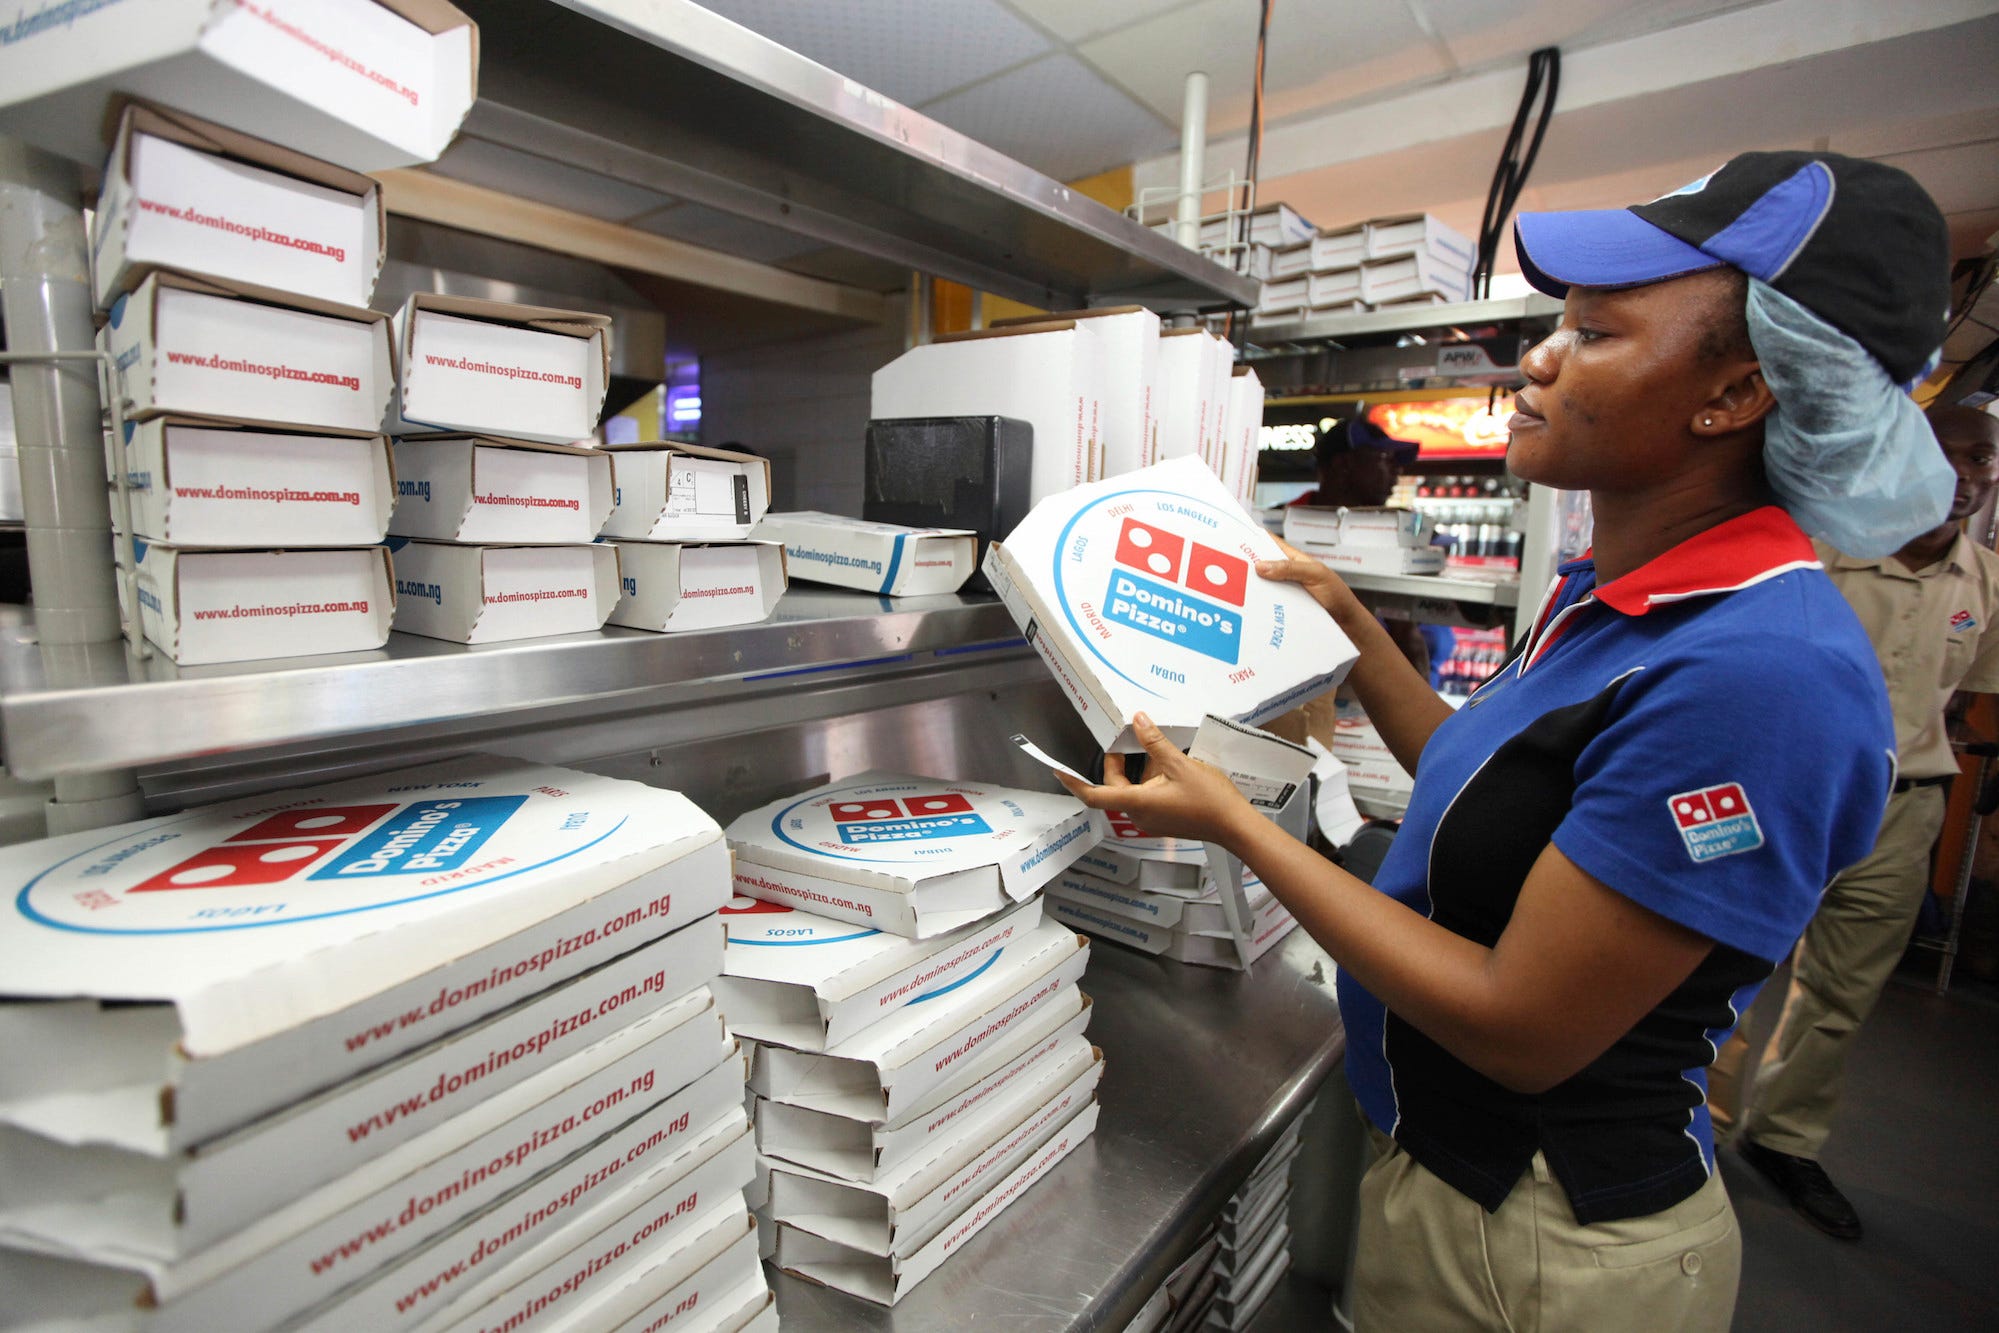 domino's pizza is the latest american product facing backlash in asia amid the middle east turmoil, exec says